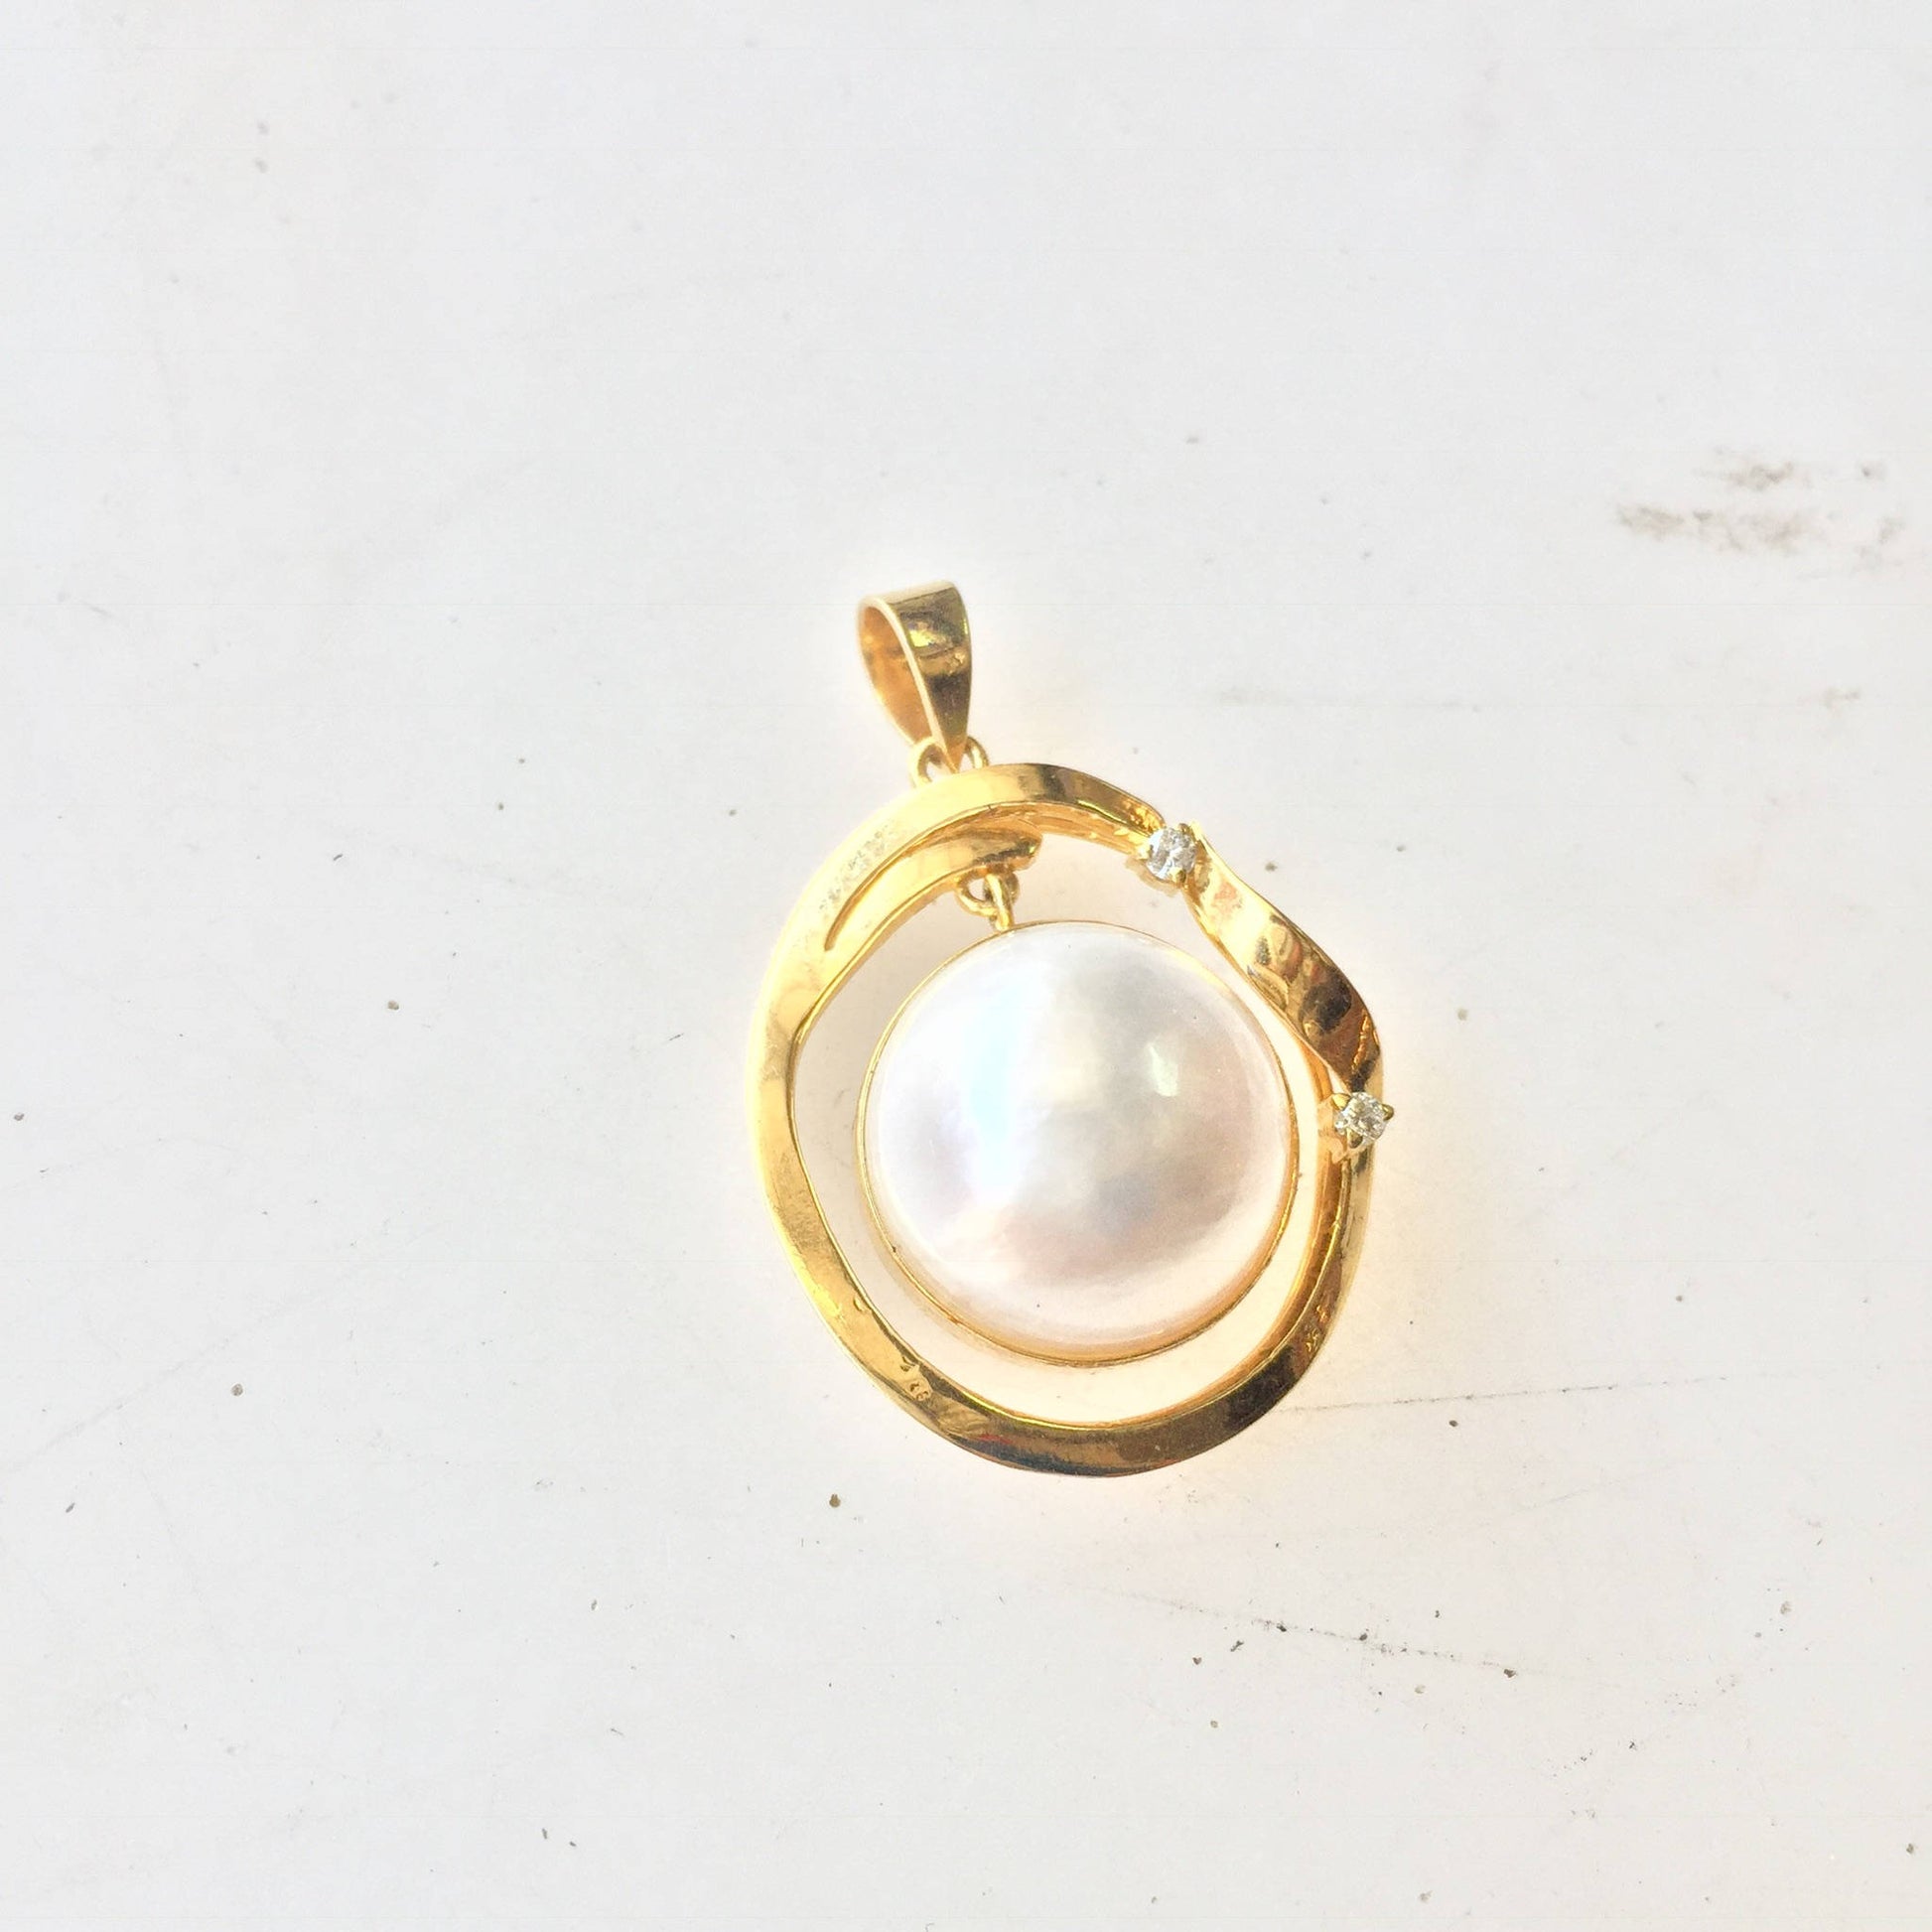 14 karat gold pendant with a lustrous white pearl, vintage jewelry piece for bridal or gift